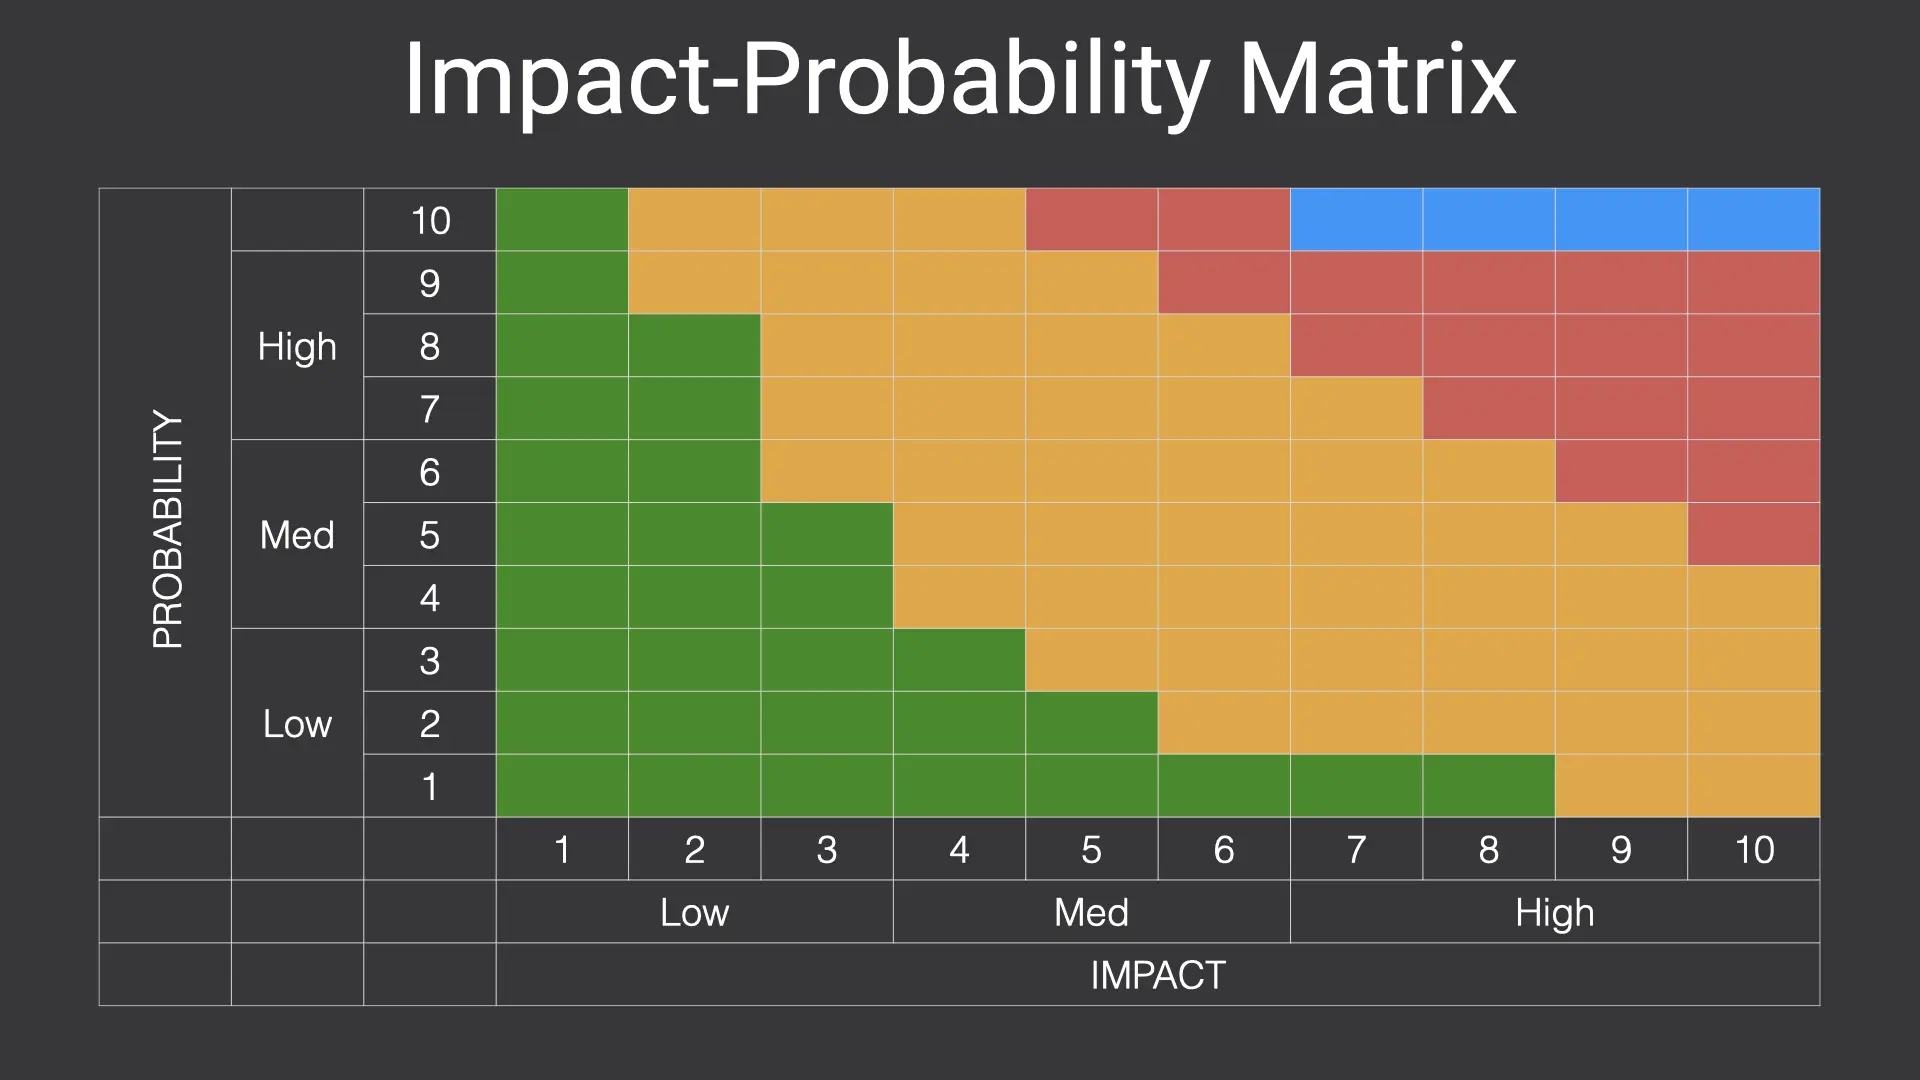 Impact-Probability Matrix is a critical tool in risk management